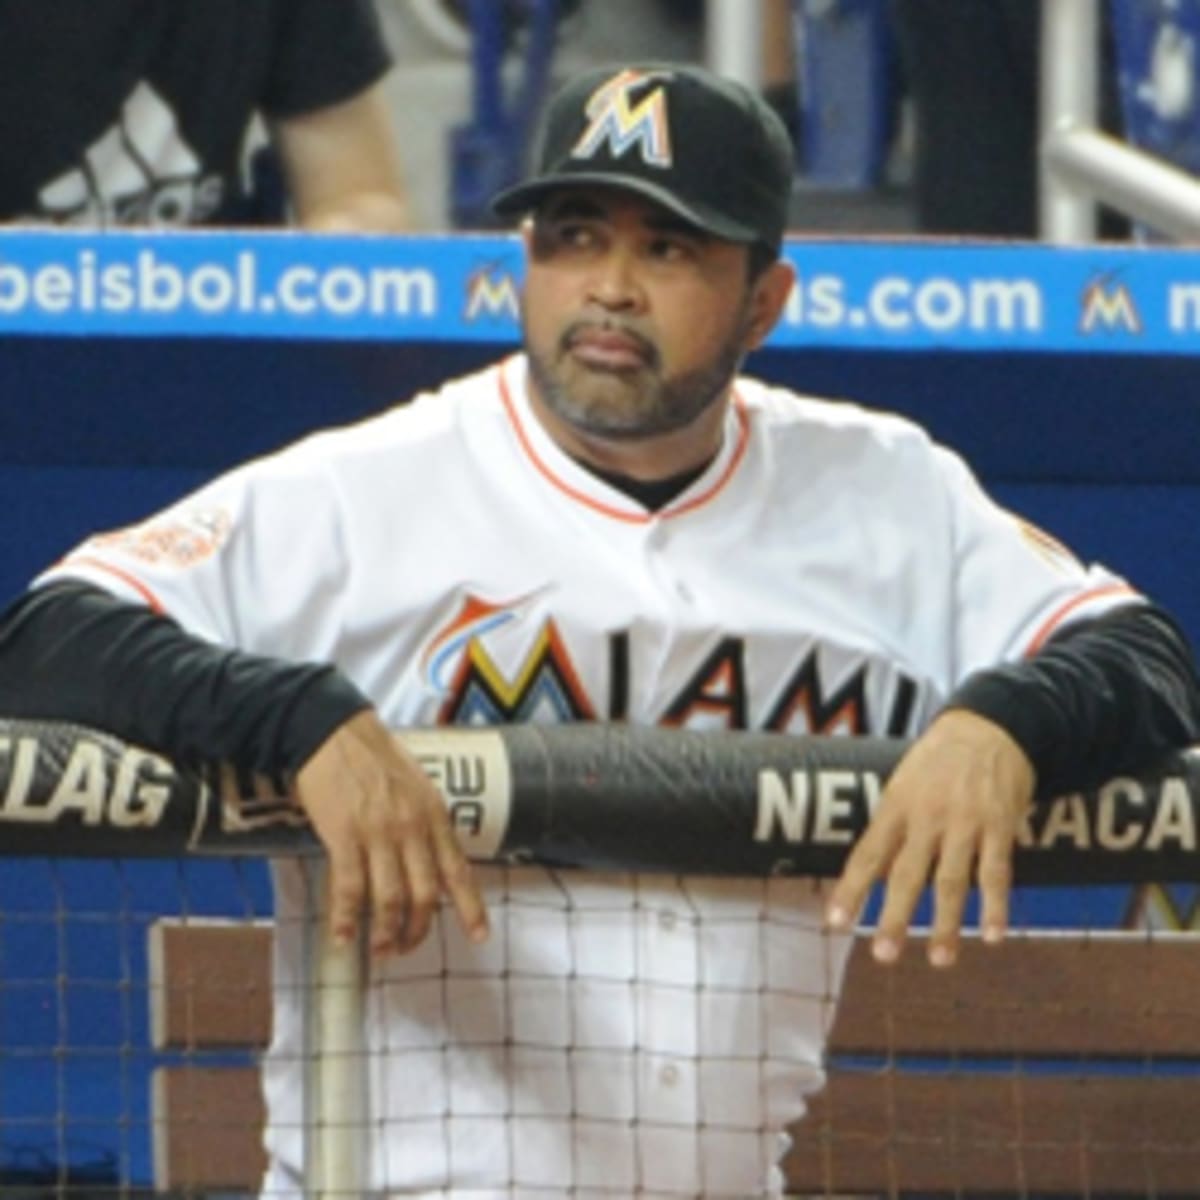 Notes: Marlins fire manager Ozzie Guillen - The Boston Globe